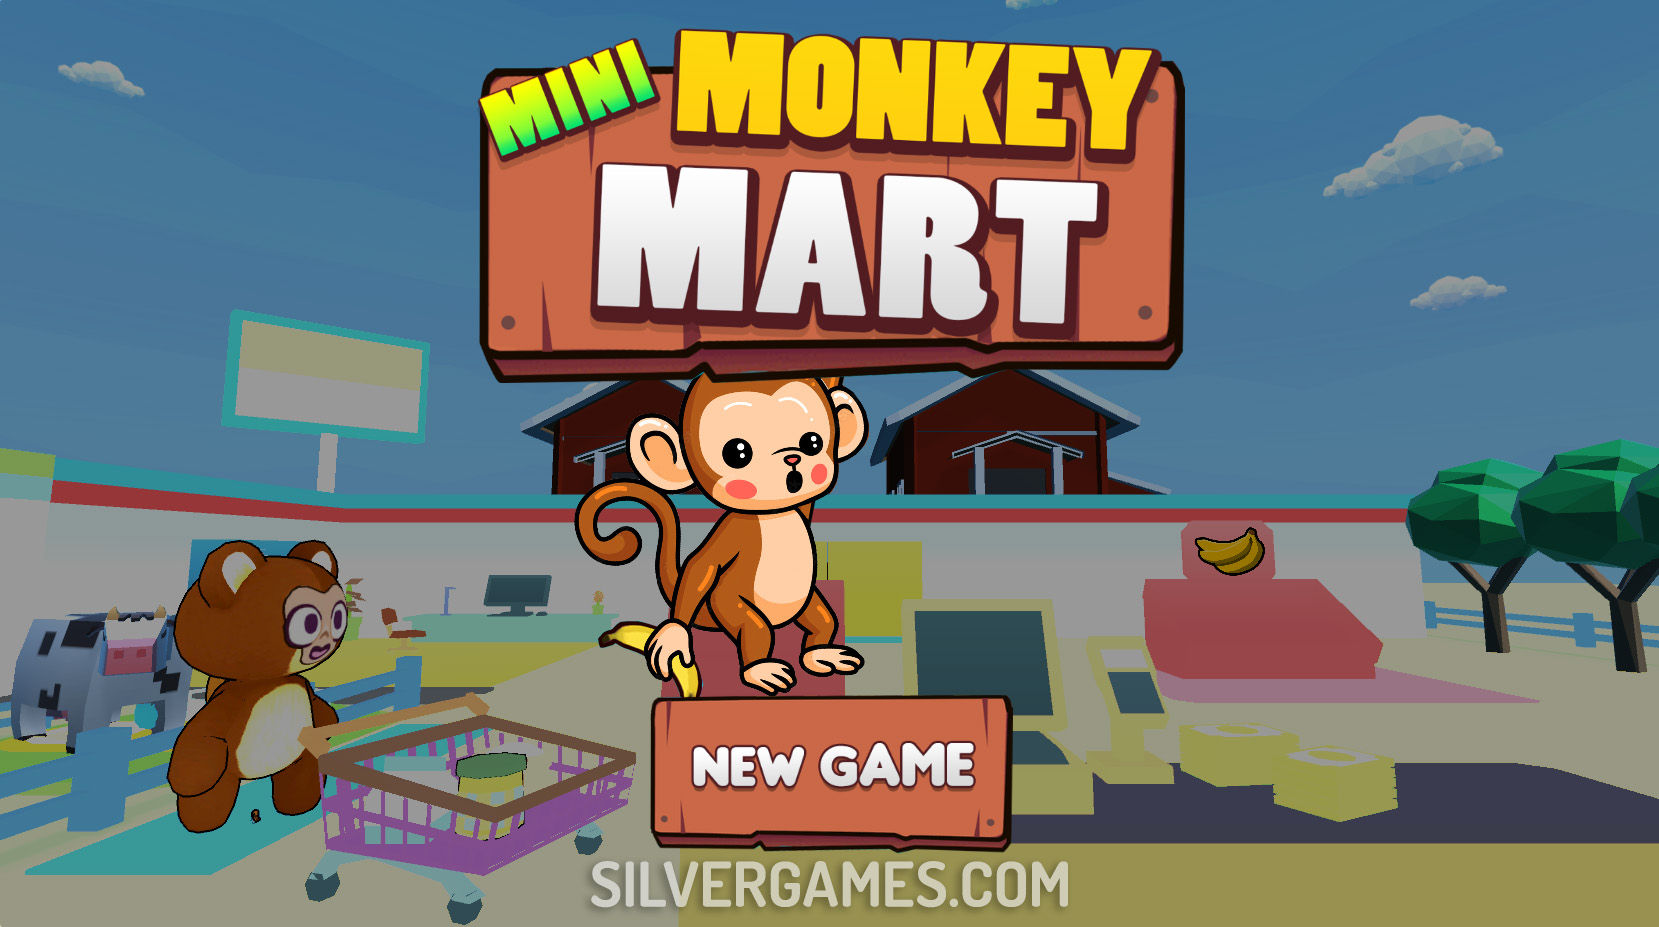 Monkey Mart Mini: A Fun And Exciting Game For All Ages